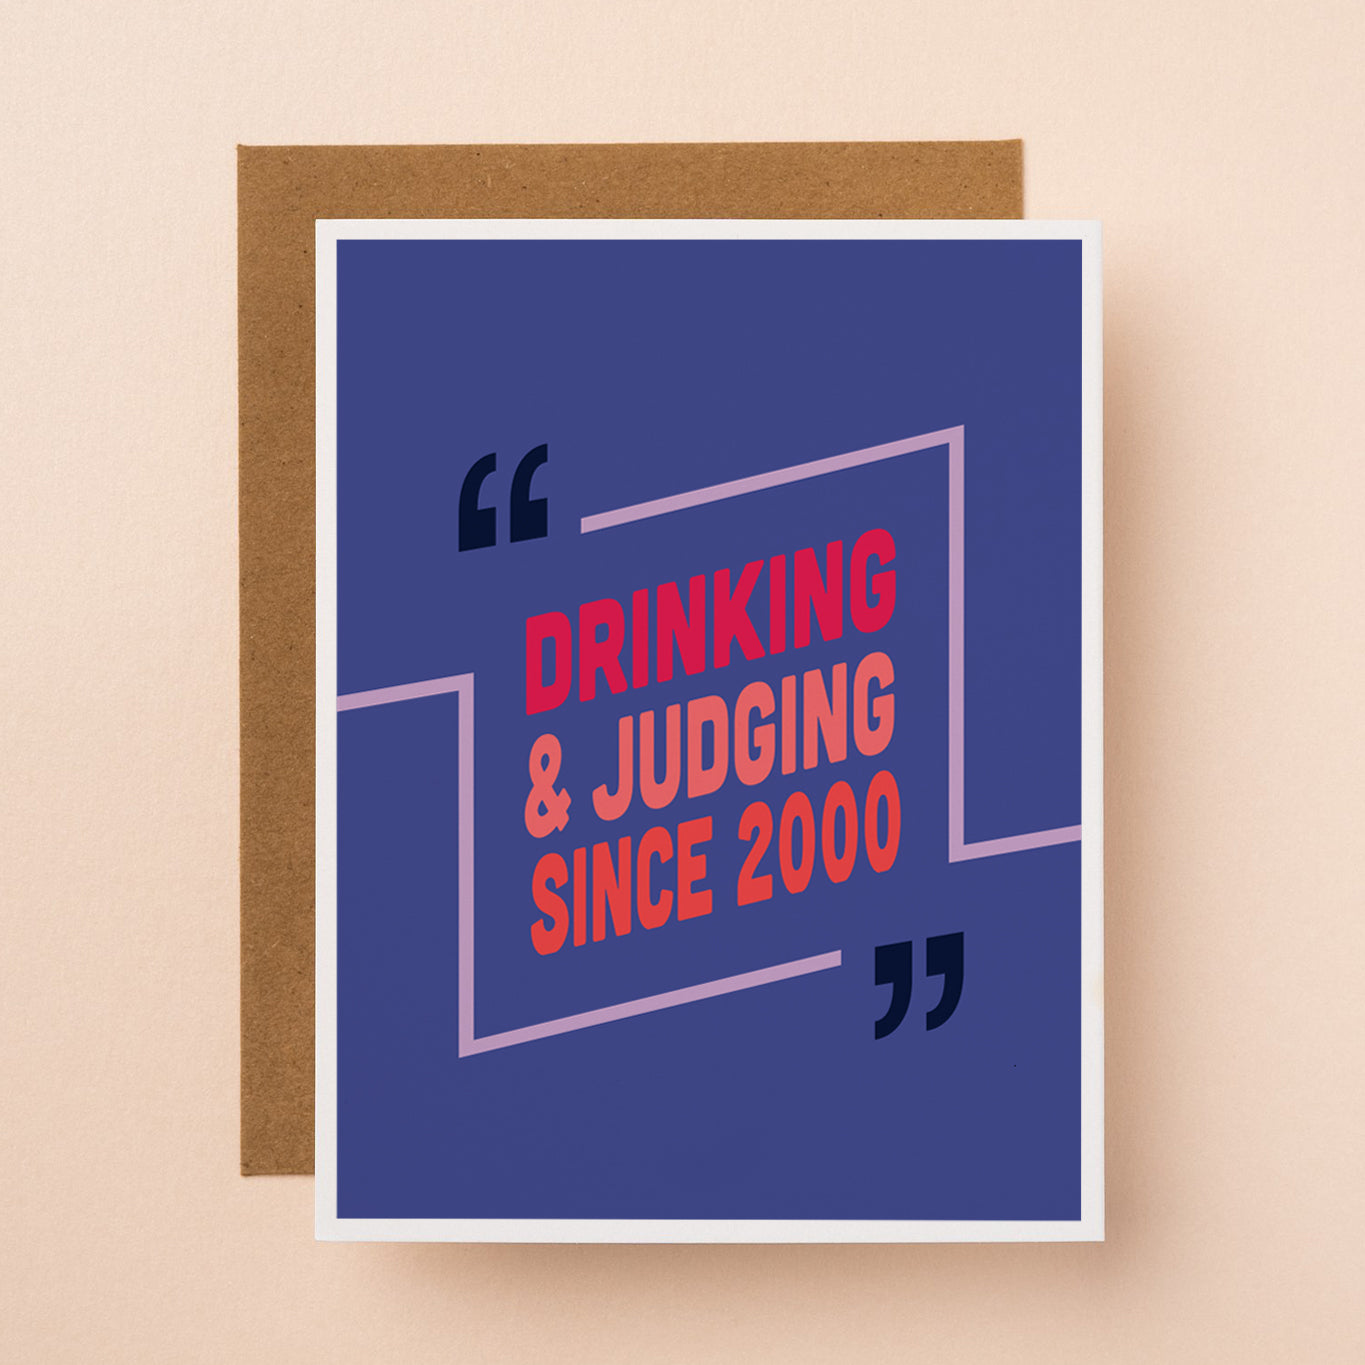 A funny friendship greeting card about "Drinking & Judging since 2000" Colorful design 